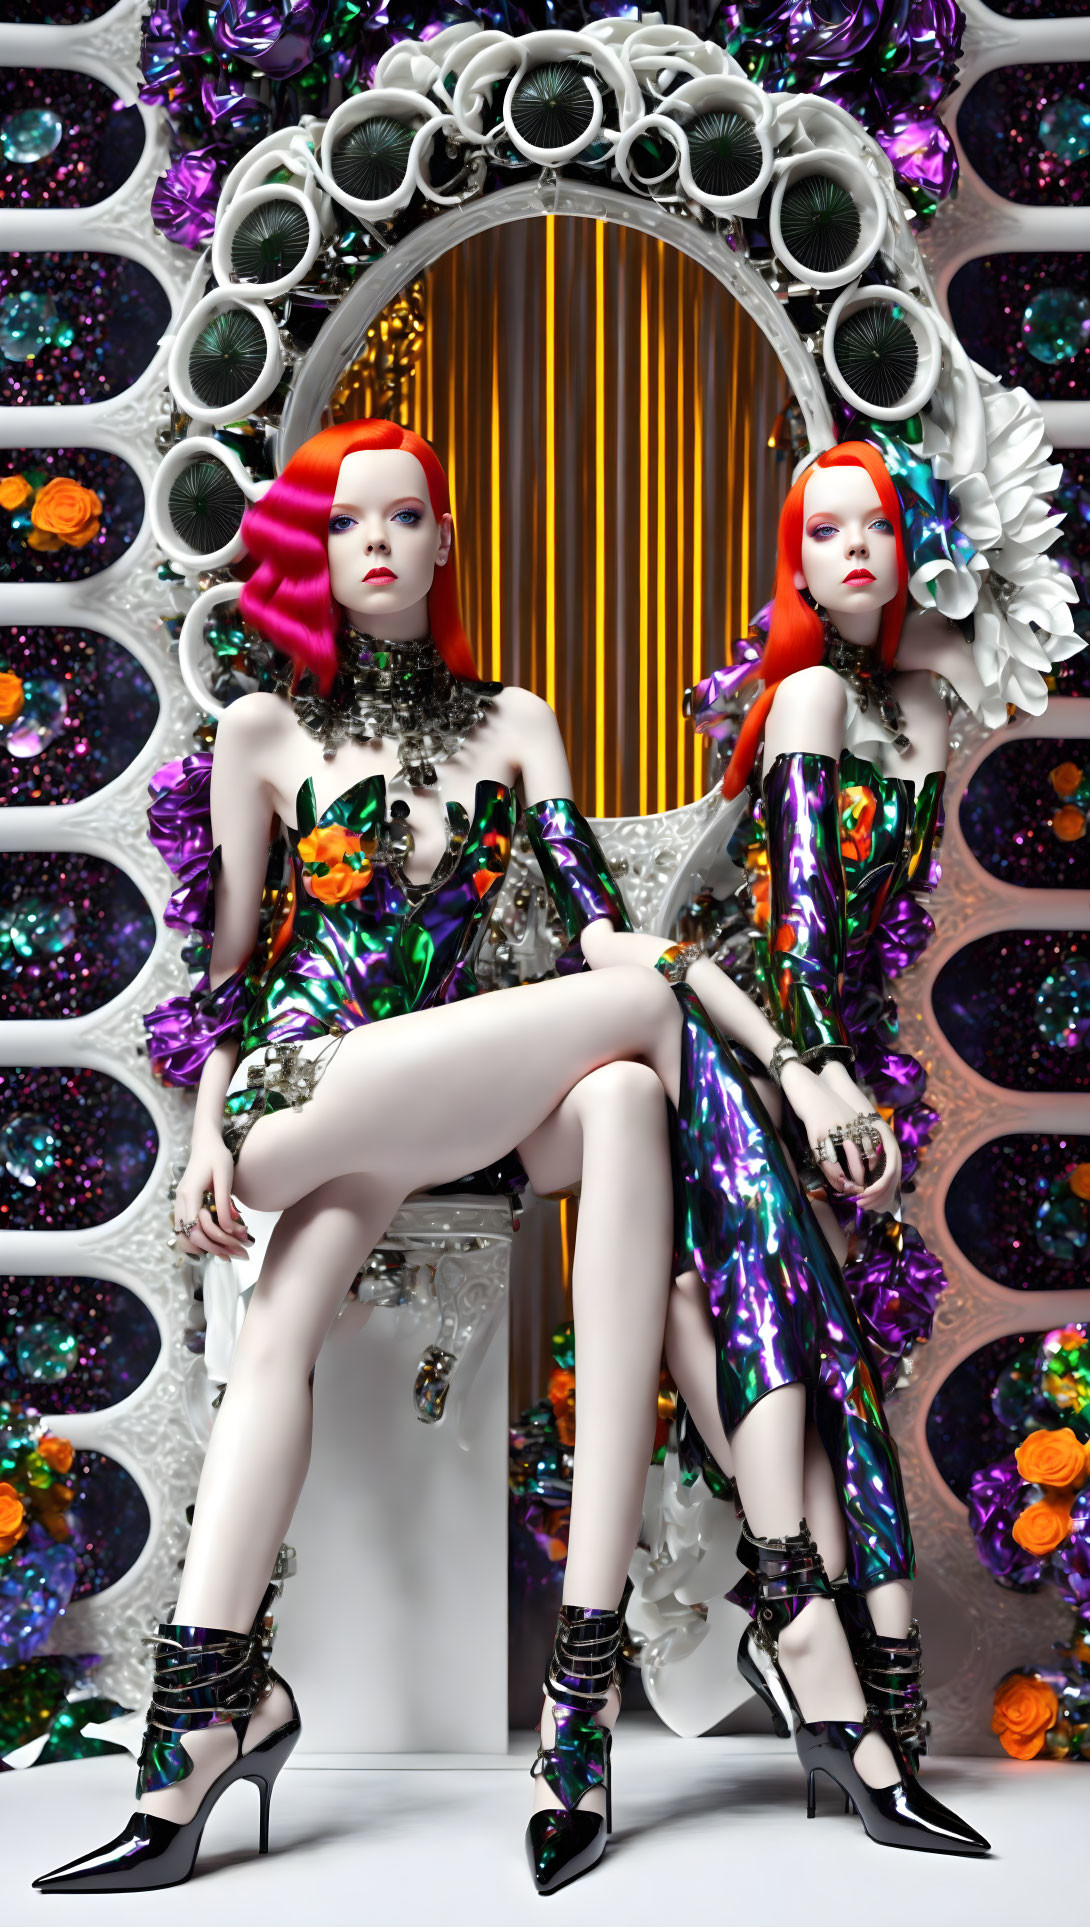 Vibrant Hair Mannequins in Avant-Garde Outfits on Decorative Backdrop